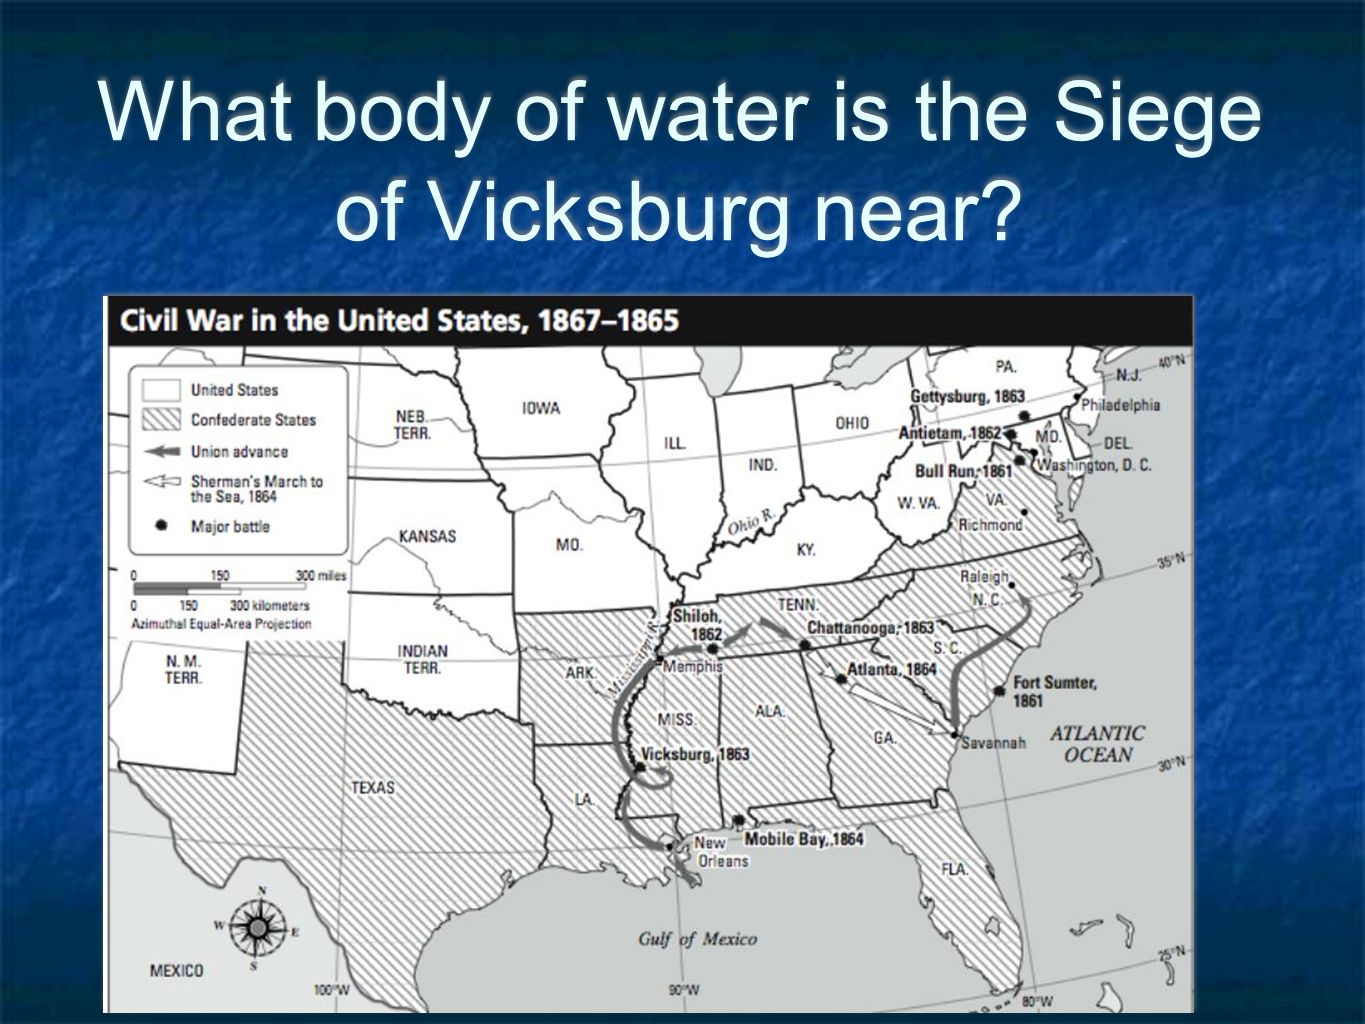 What body of water is the Siege of Vicksburg near